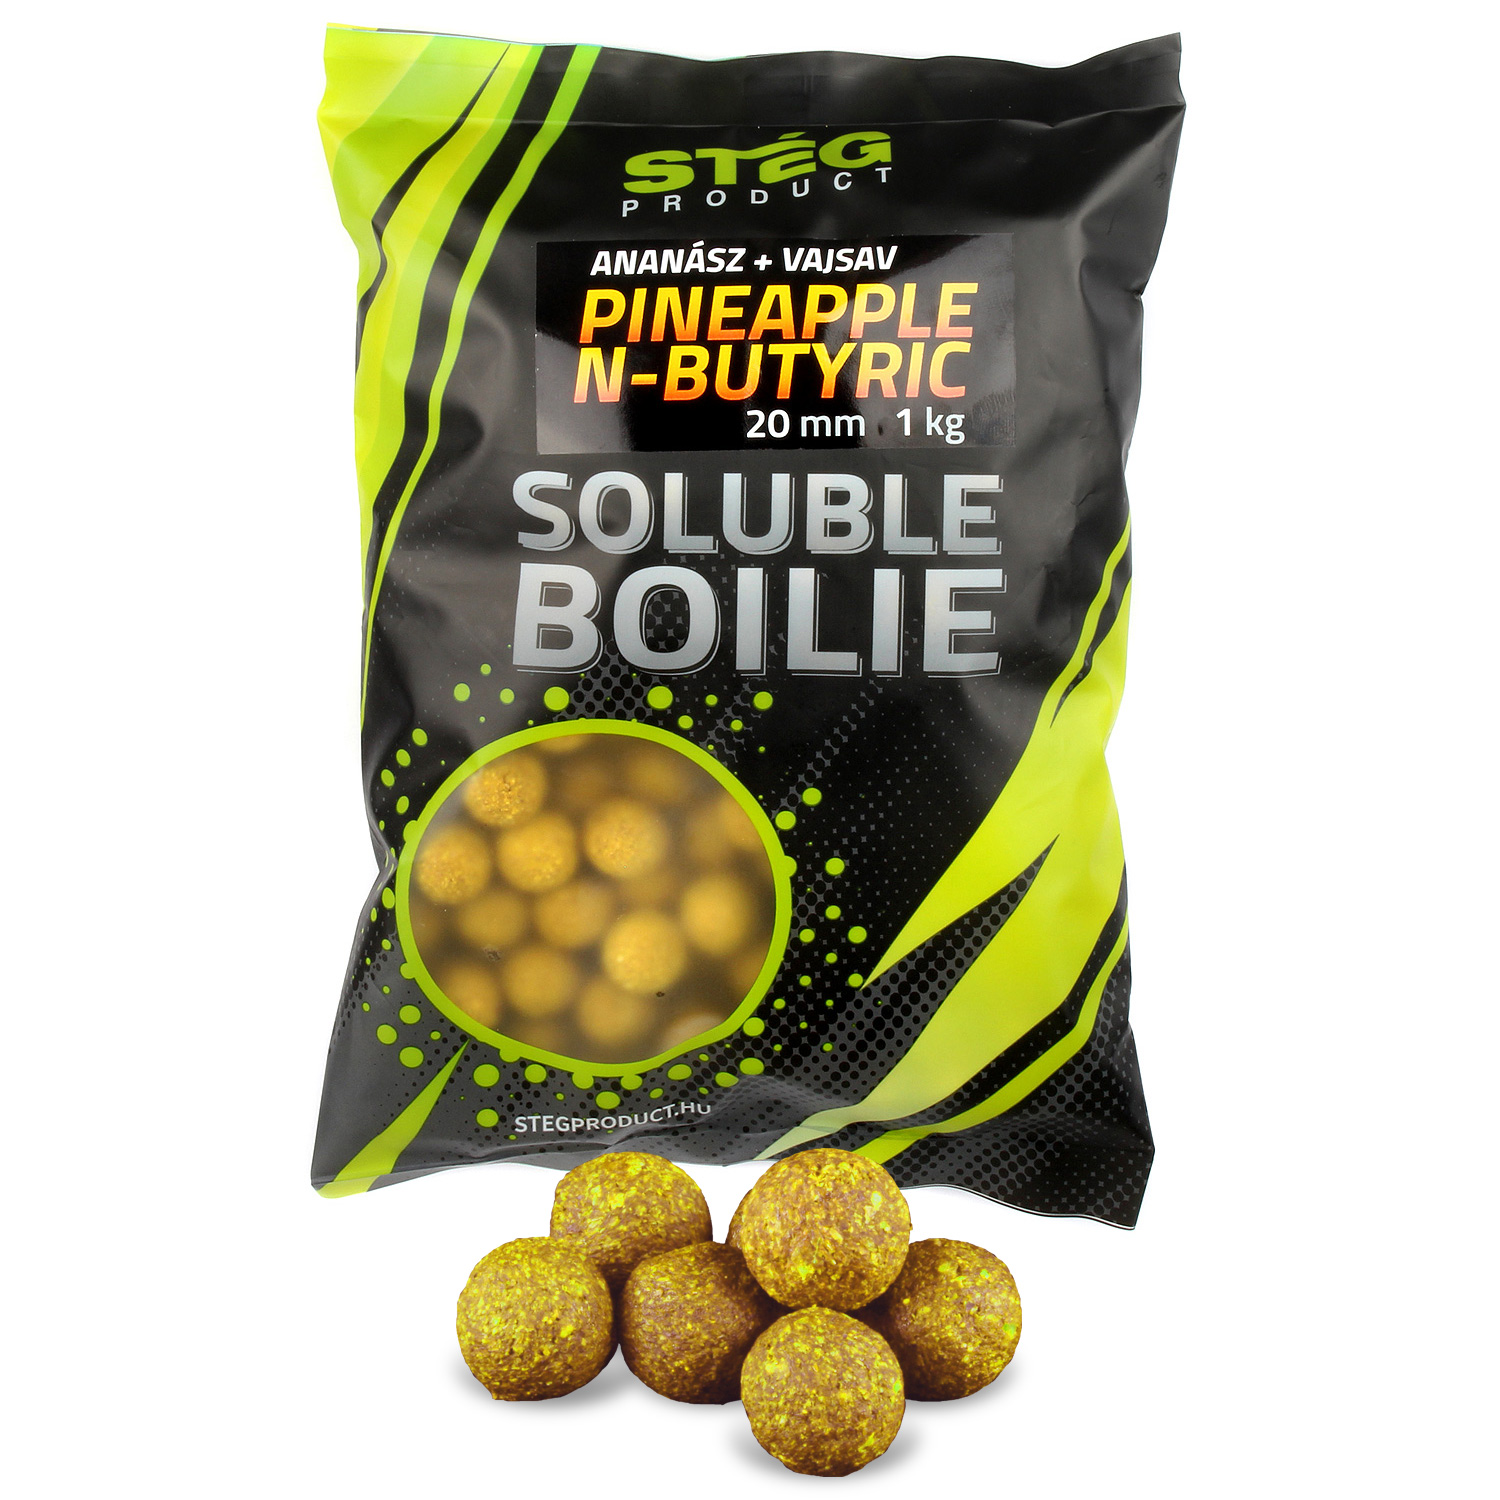 Stg Product Soluble Boilie 24mm Pineapple-N-Butyric 1kg